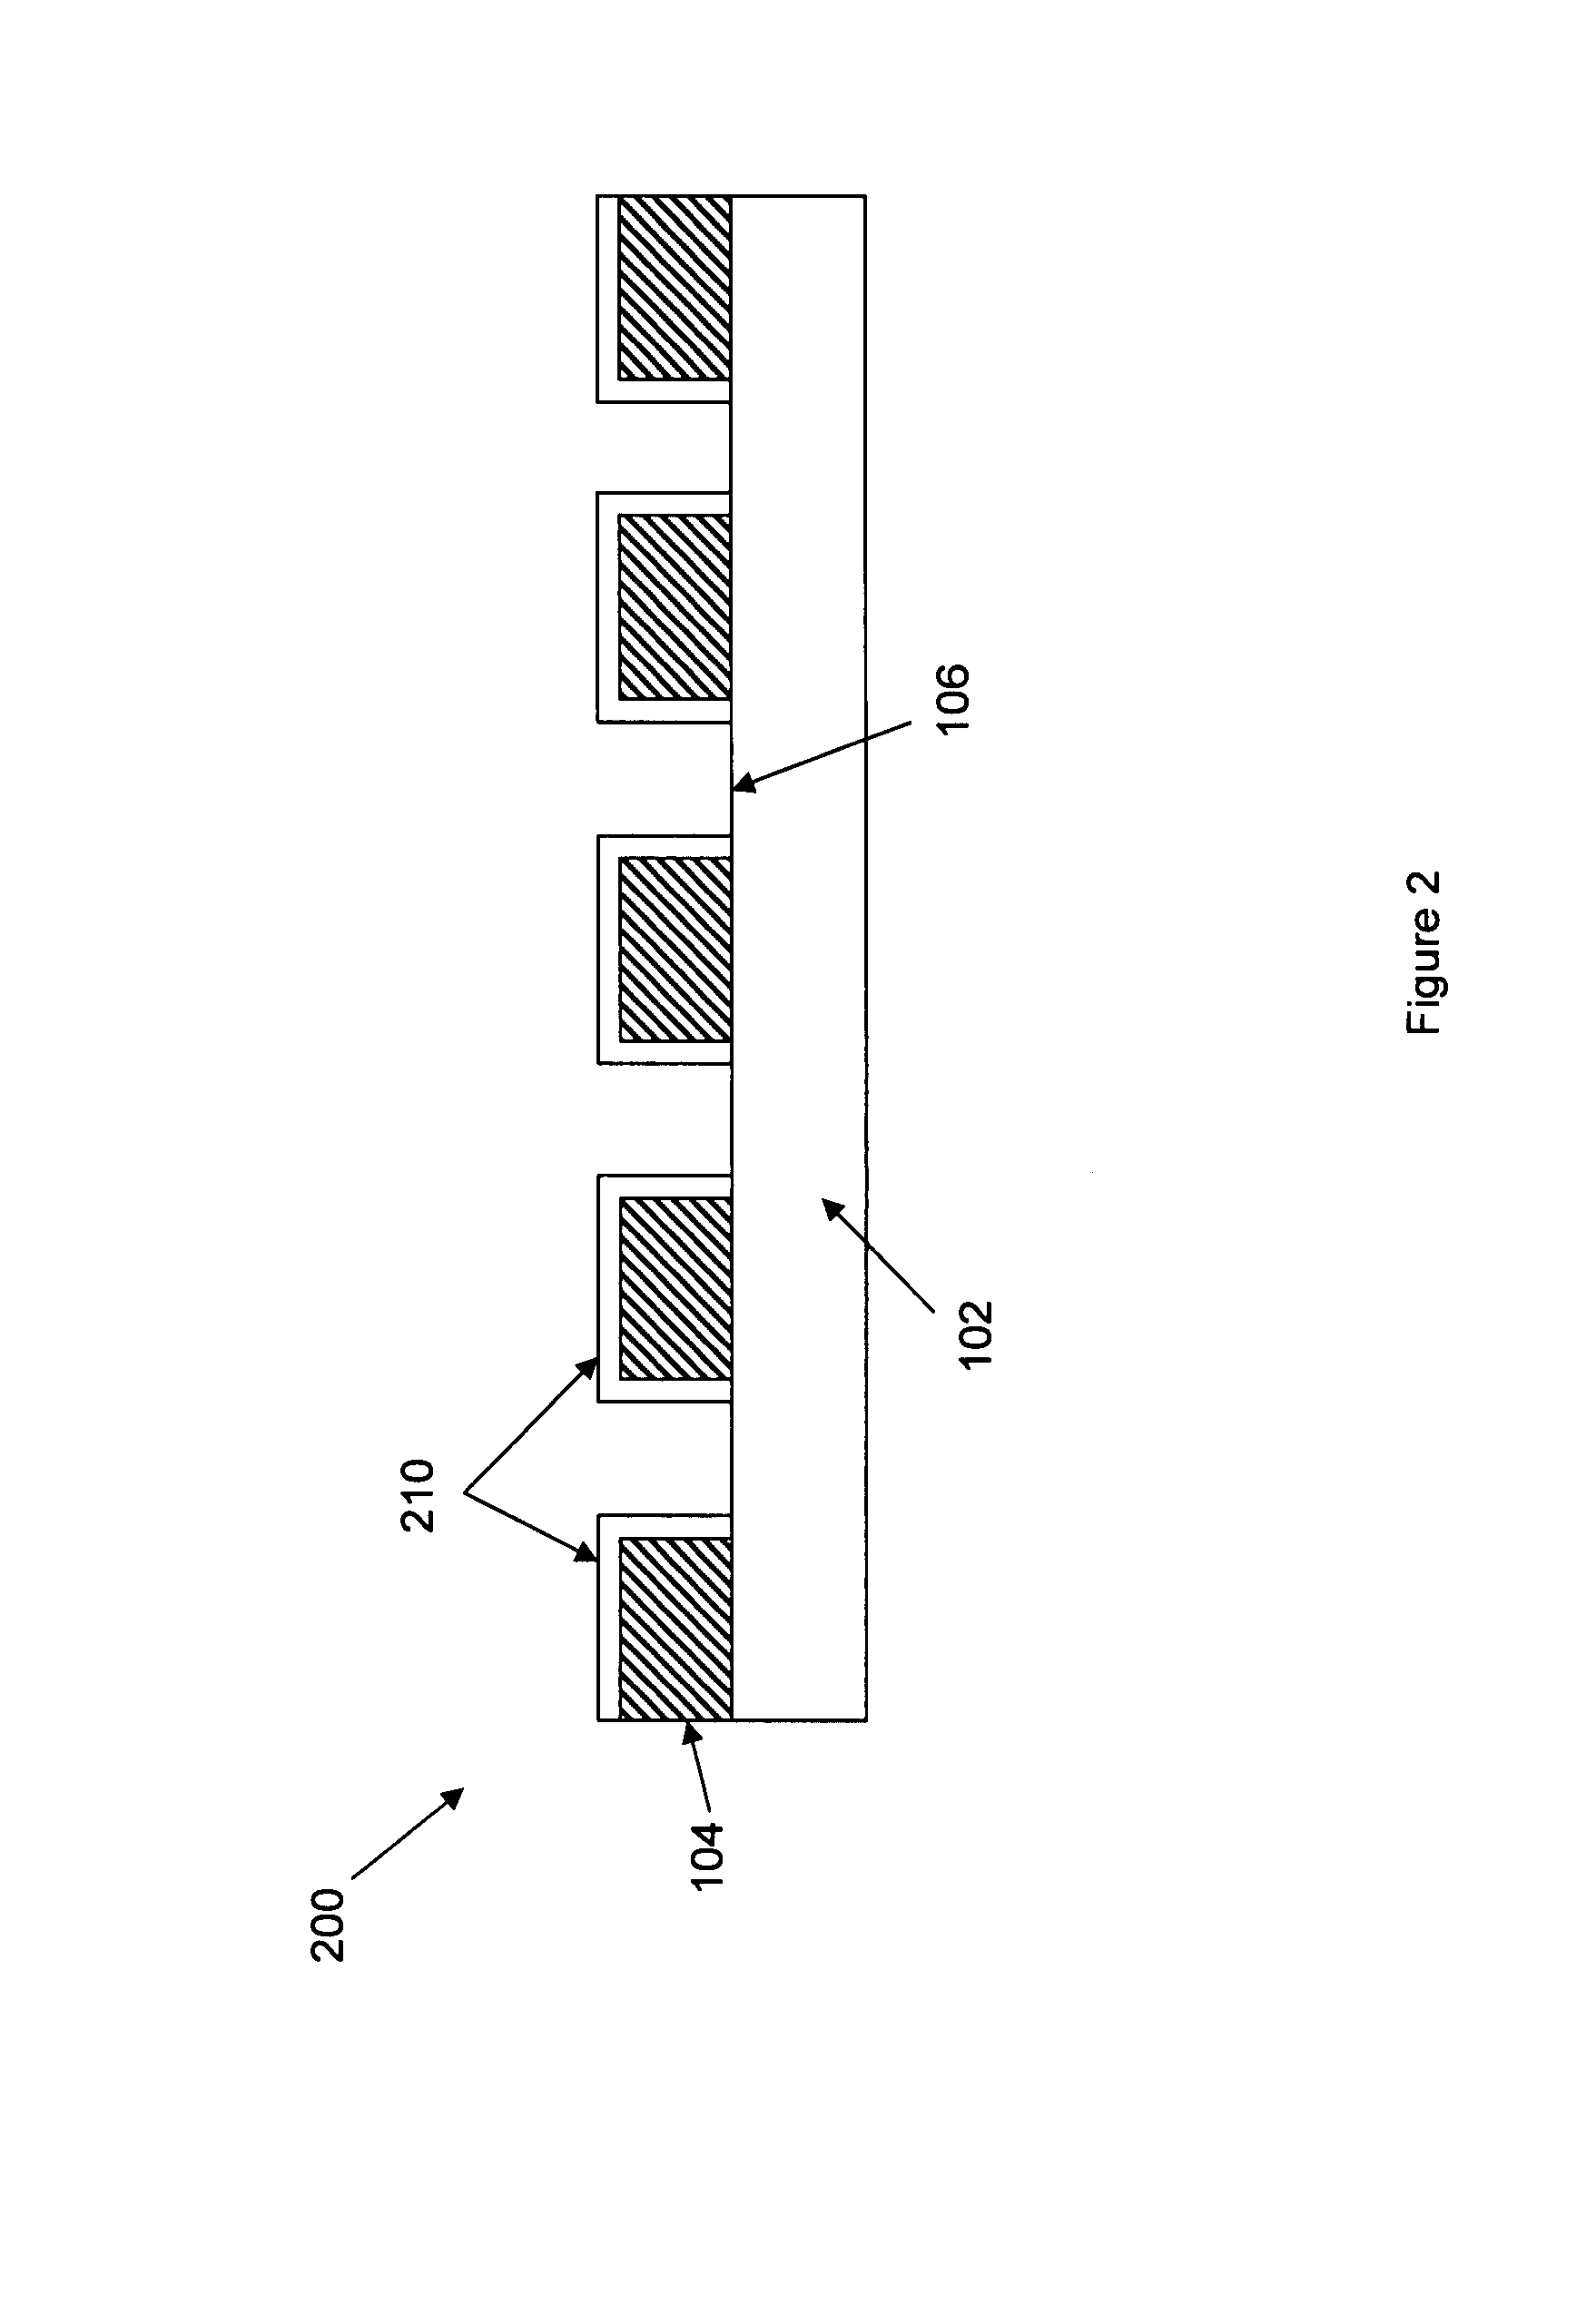 Uniform surfaces for hybrid material substrates and methods for making and using same